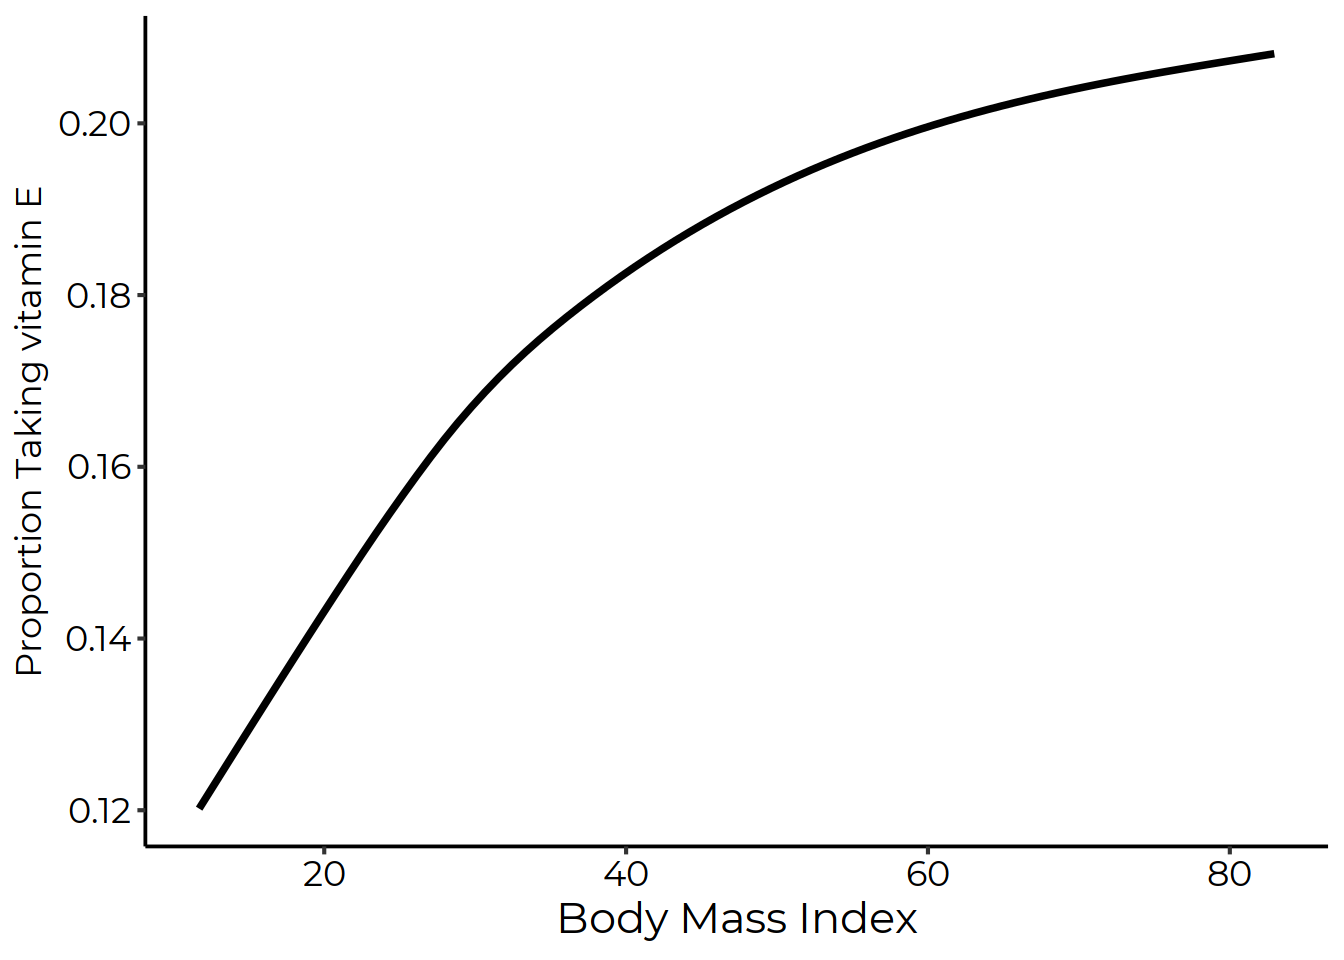 Smooth LOESS curve showing that people with higher BMIs took more vitamin E